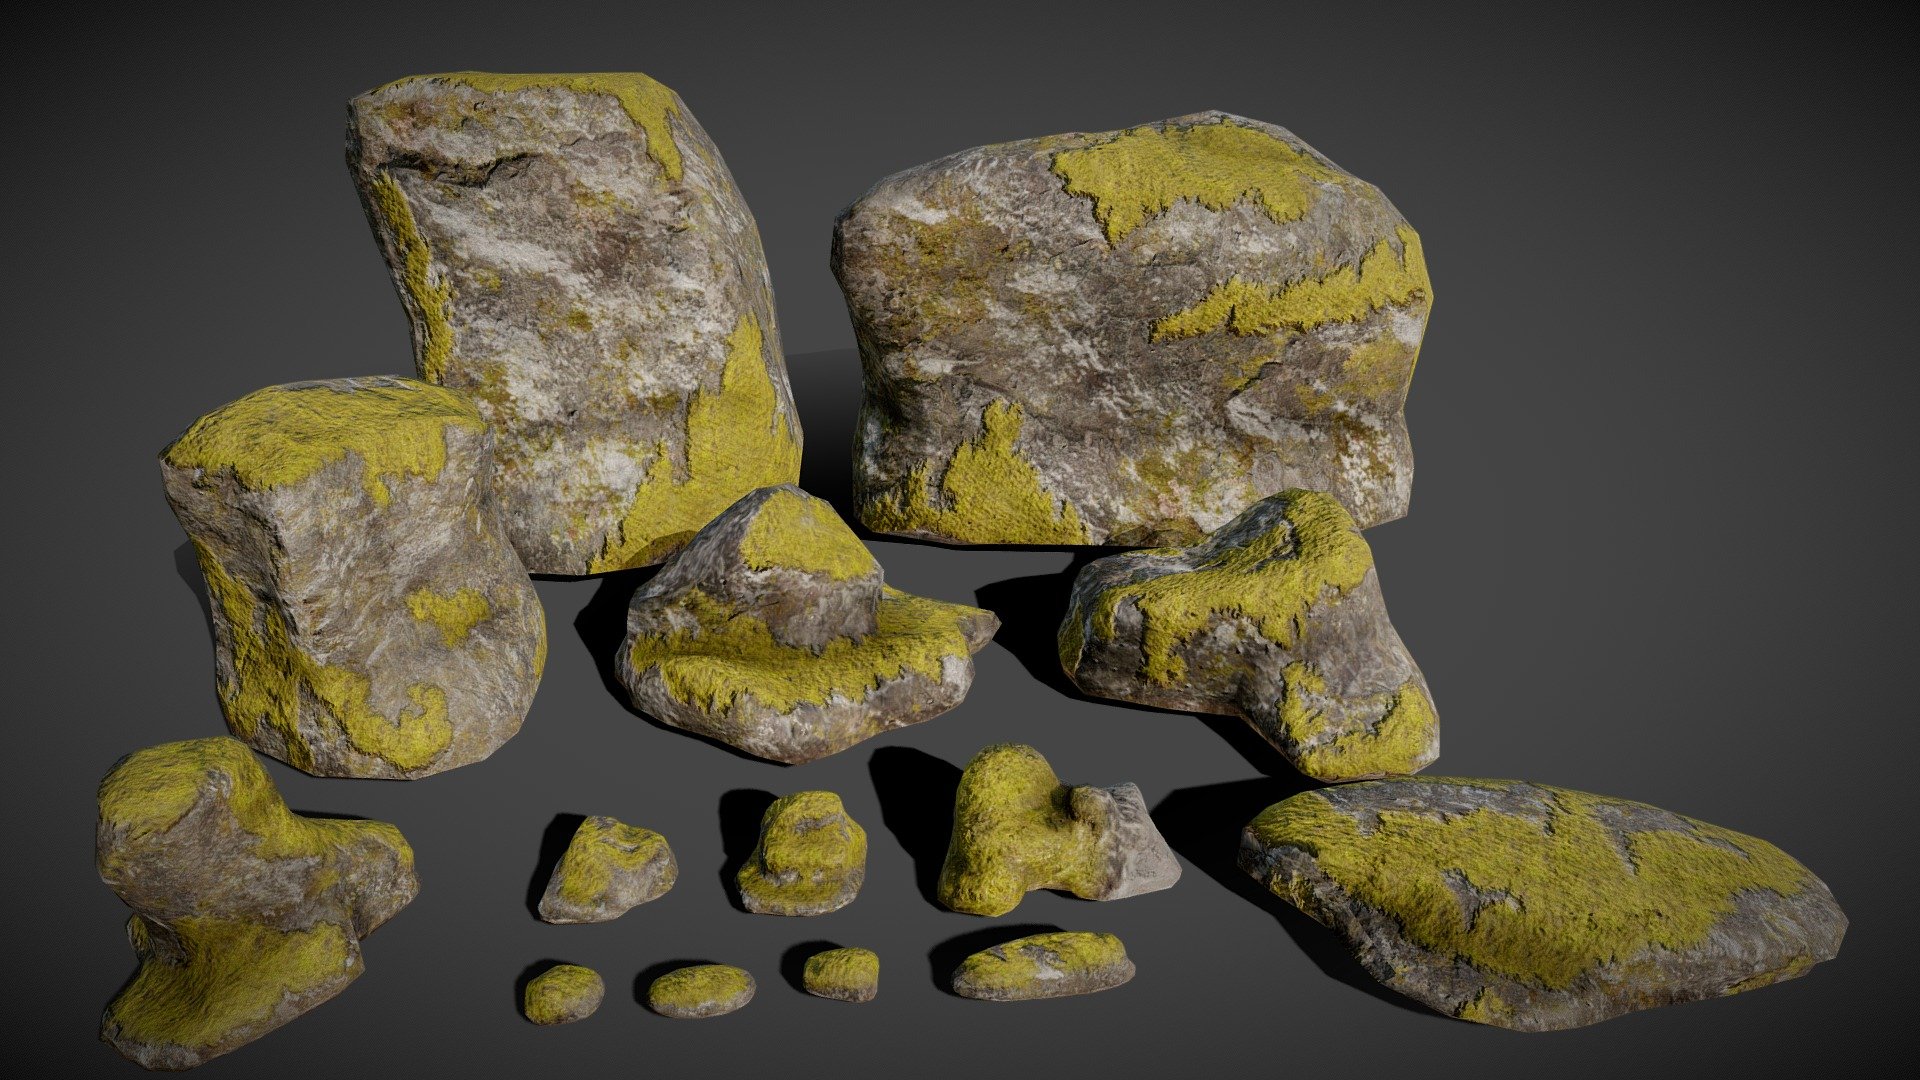 small and medium rocks textures at 1024x1024 , bigger rocks textures at 2048x2048.

the .RaR file contains all the fbx and 2 texture folders (unity5 and unreal4 textures) for each model.

the RaR file size is 33mb.

14 models in total.

Total polys count: 2.568
Total verts count: 2.596 - Mossy Rocks Pack - Buy Royalty Free 3D model by Joan LP (@joanlahots) 3d model